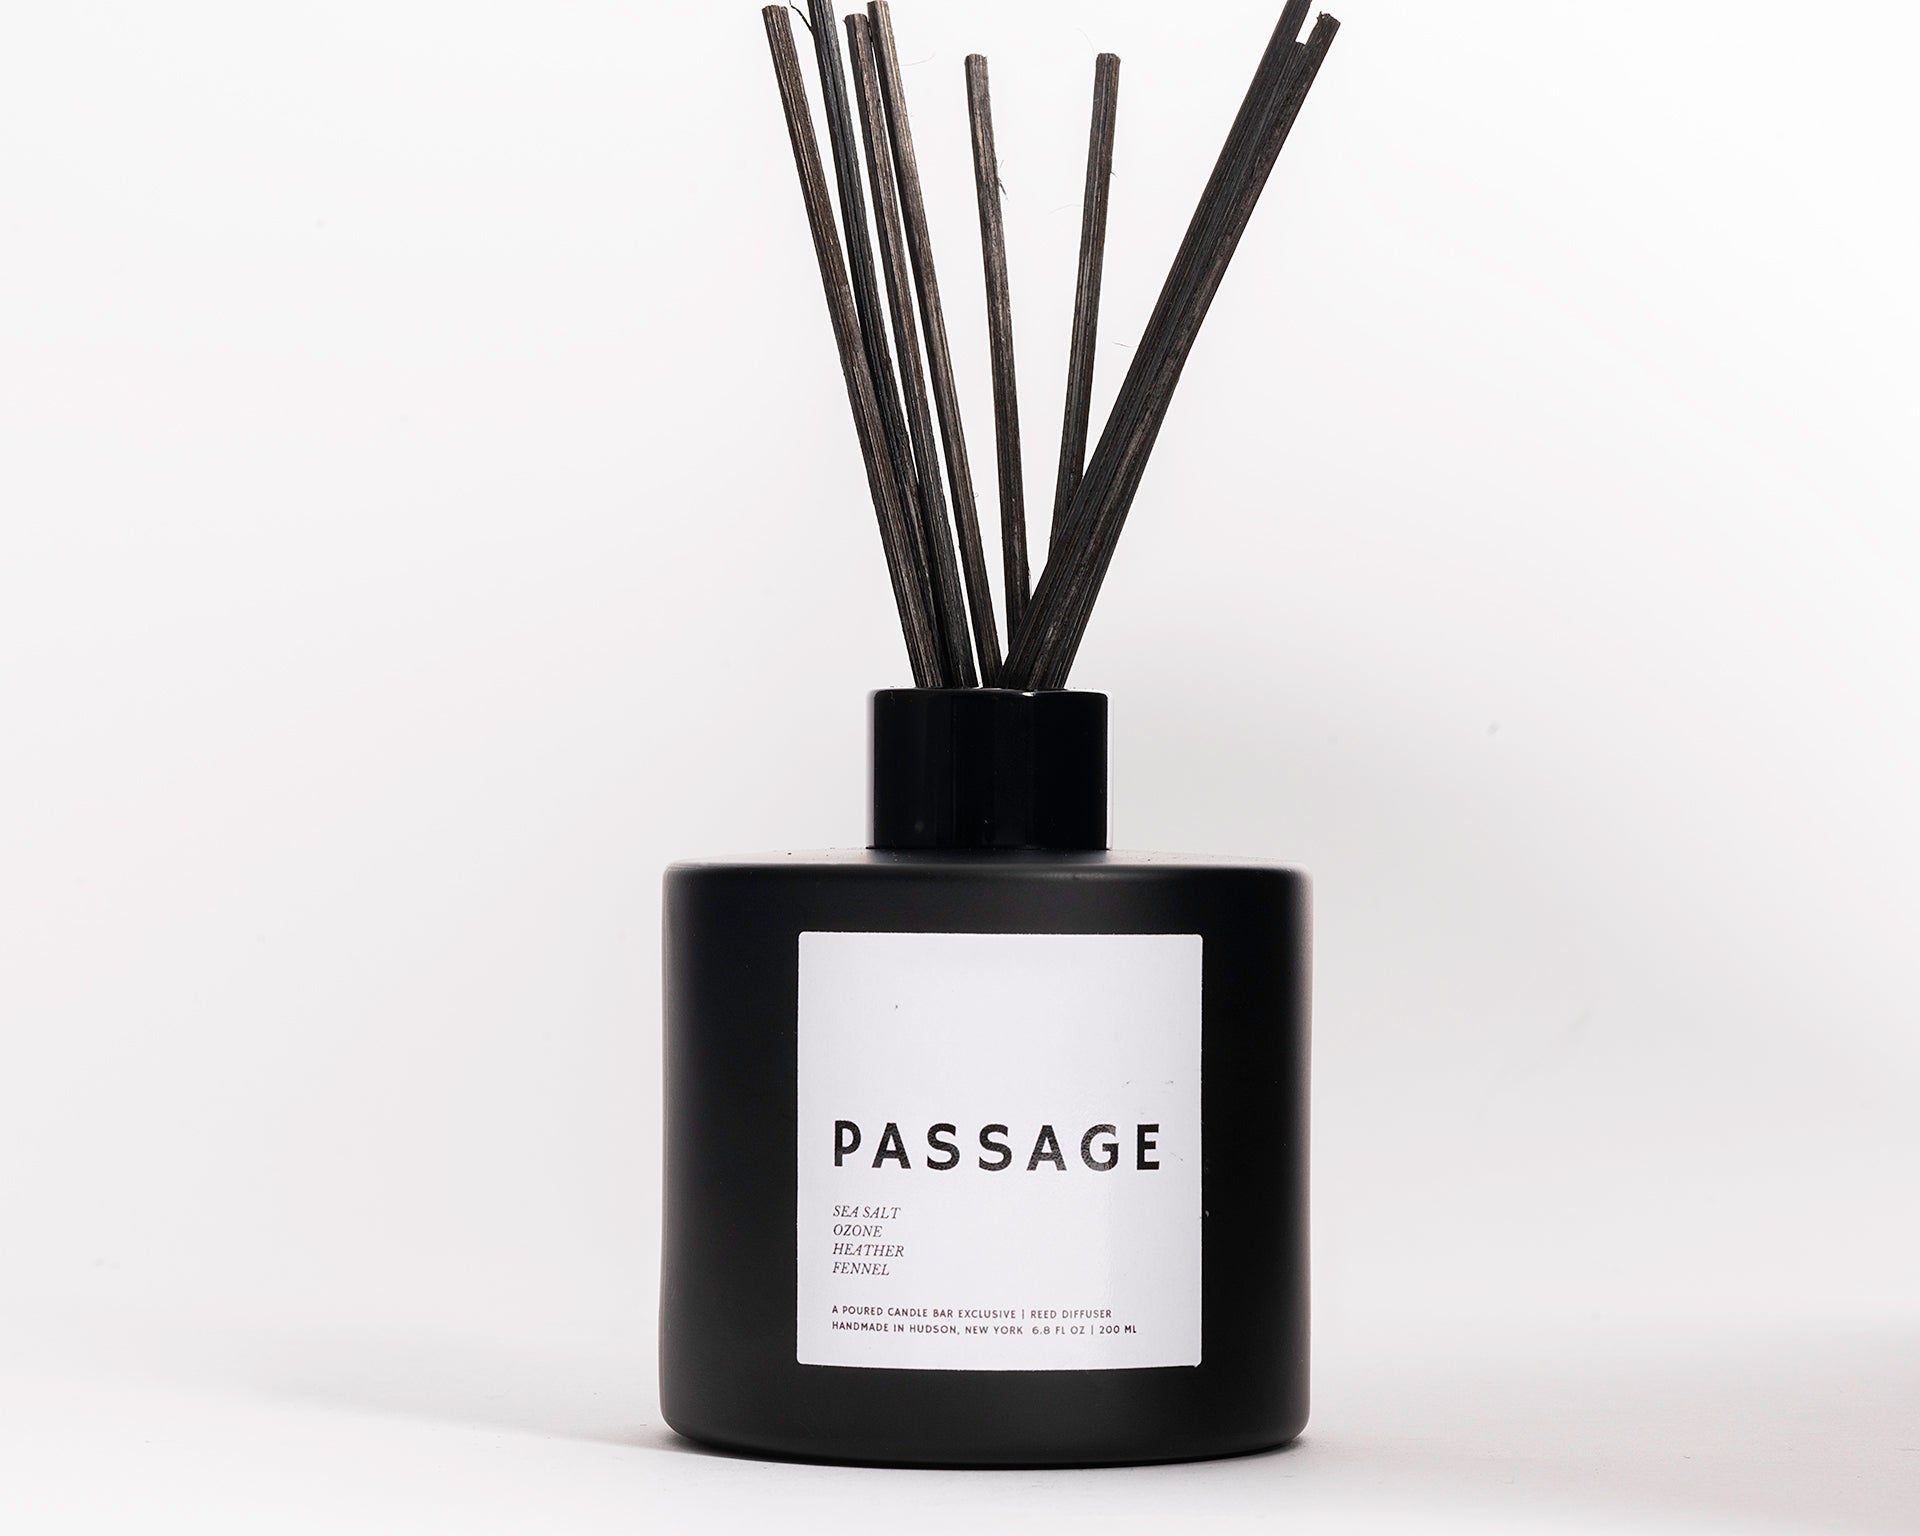 200 ml reed diffusers in a black circular glass vessel. Profile Description: Ozonic + clean with mild floral + vegetal notes  Notes: Aldehydes, Ozone, Sea Salt, Wet Rock, Heather, Fresh Fennel